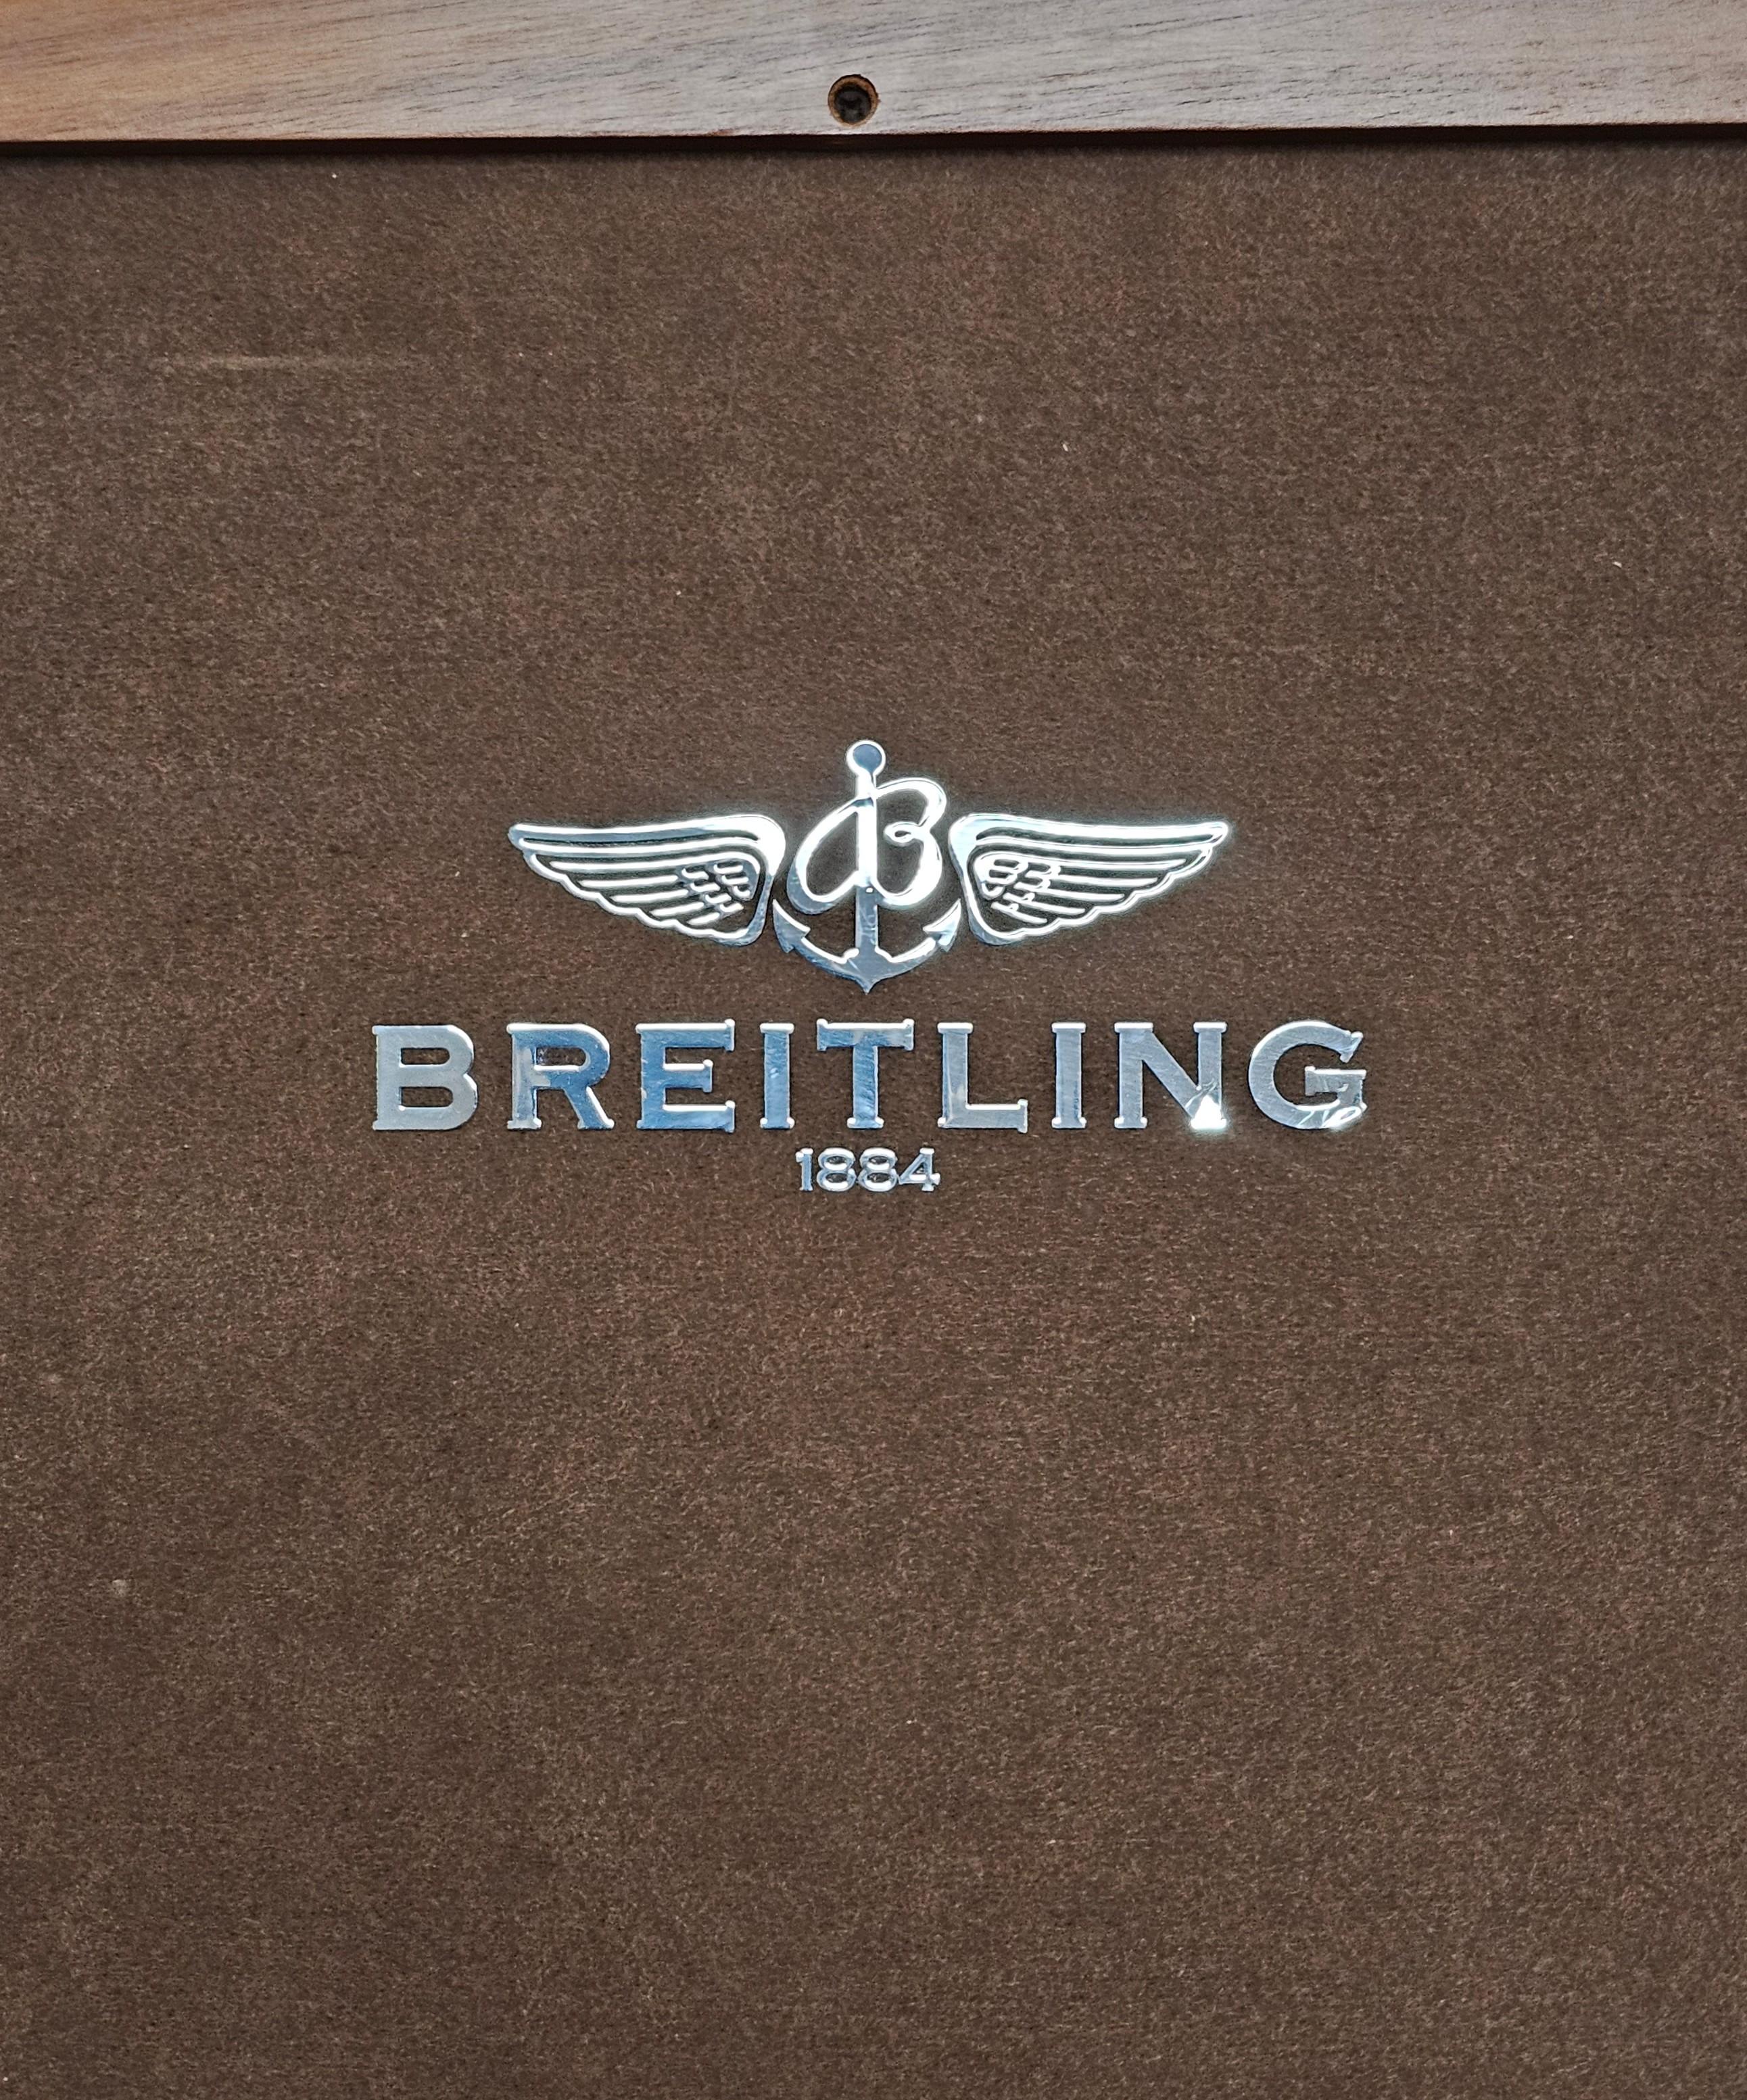 Breitling Retail Store Display Advertising Sign  For Sale 10